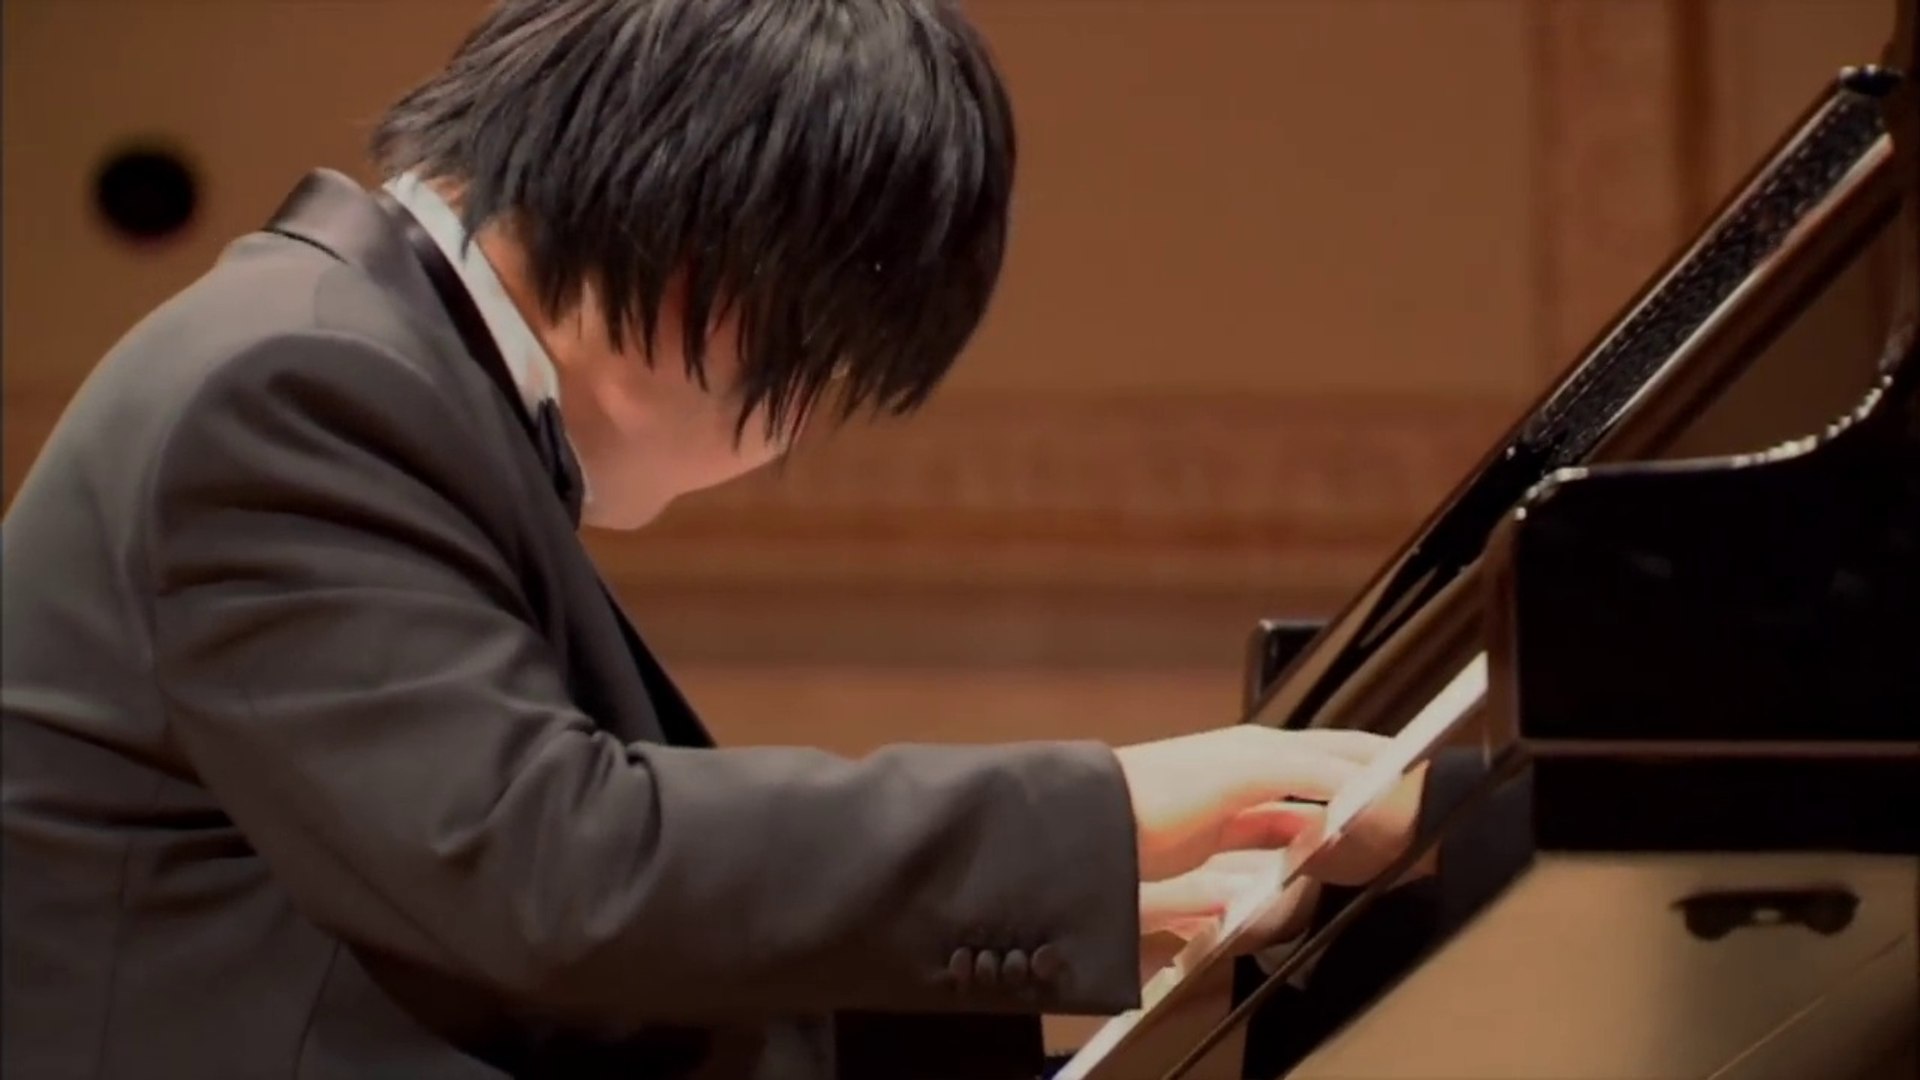 Pianist in tears. Most Moving Piano Performance